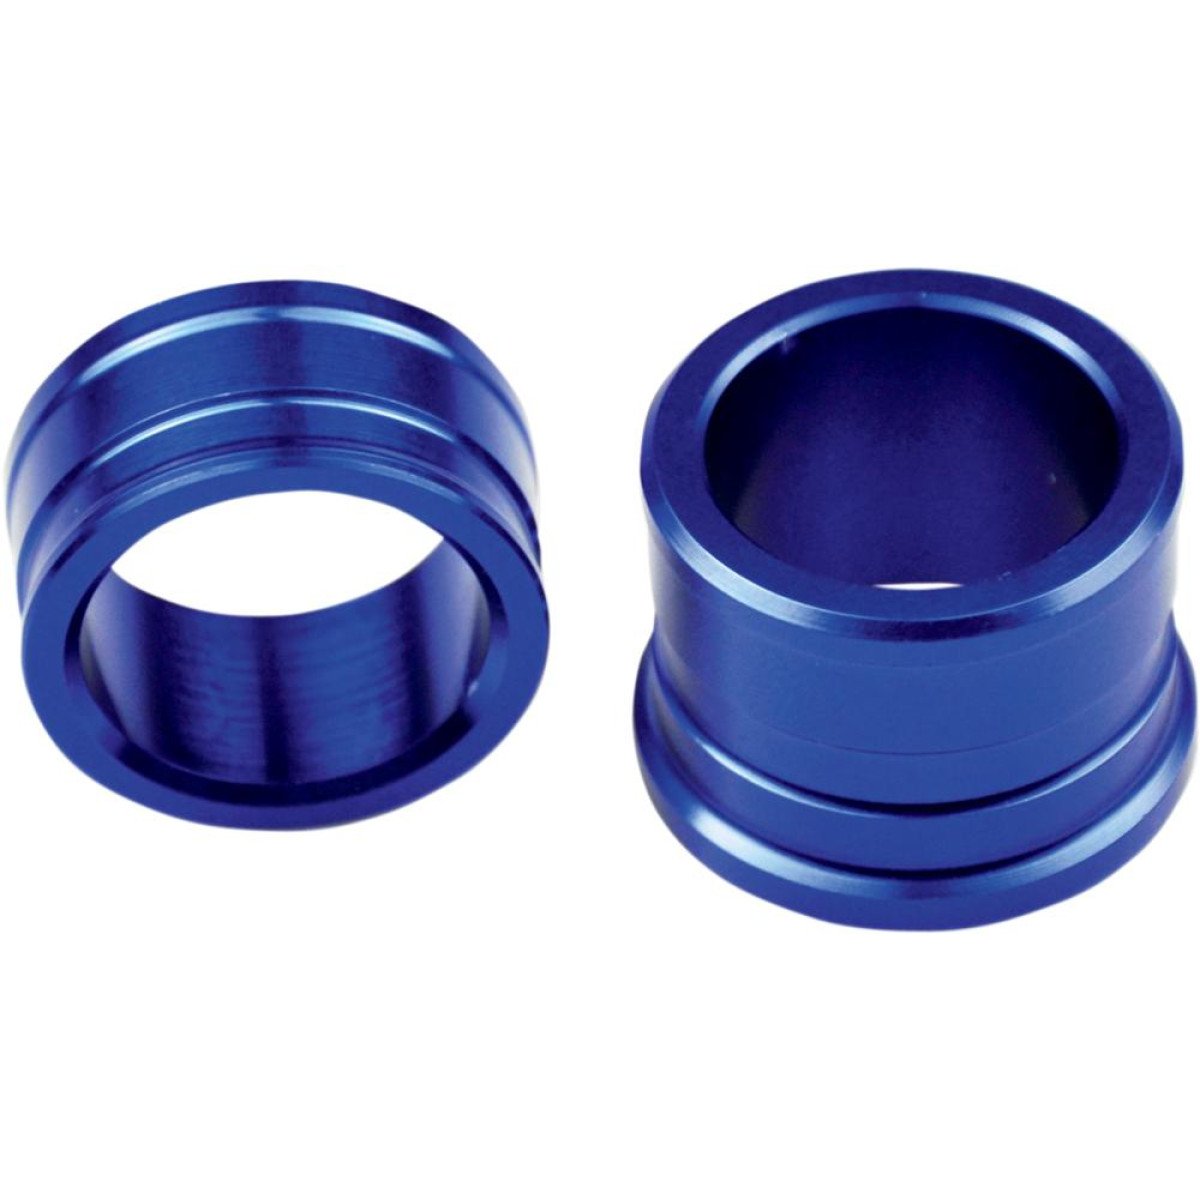 SCAR Wheel Spacers  Front, Yamaha YZ 125/250, YZ-F 250/450